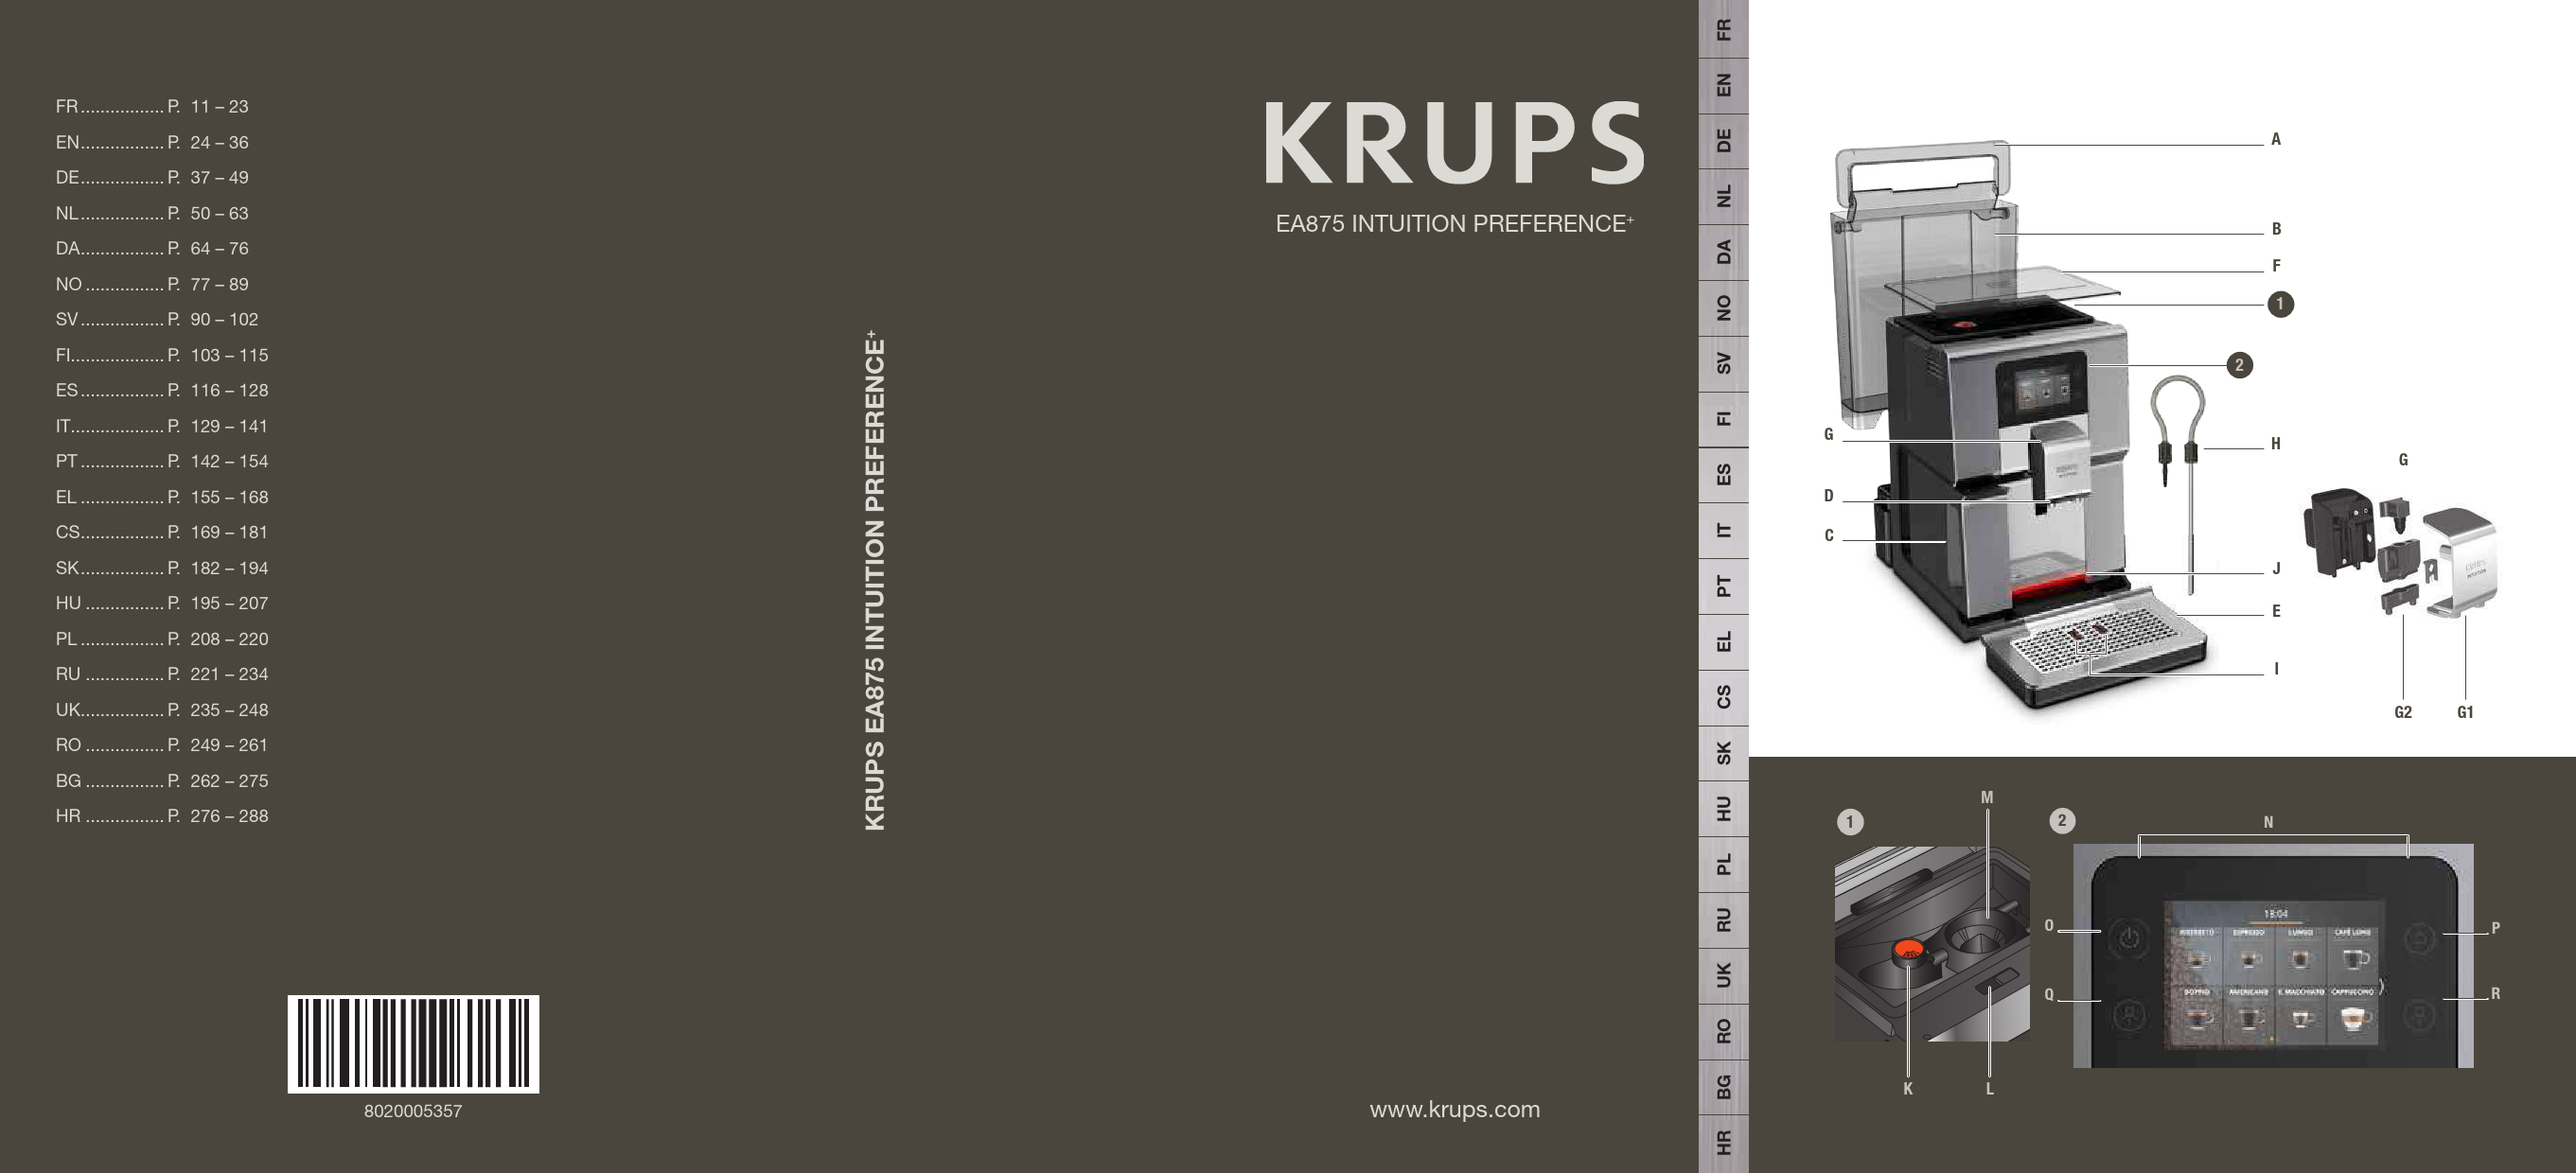 Mode d'emploi KRUPS INTUITION PREFERENCE EA875